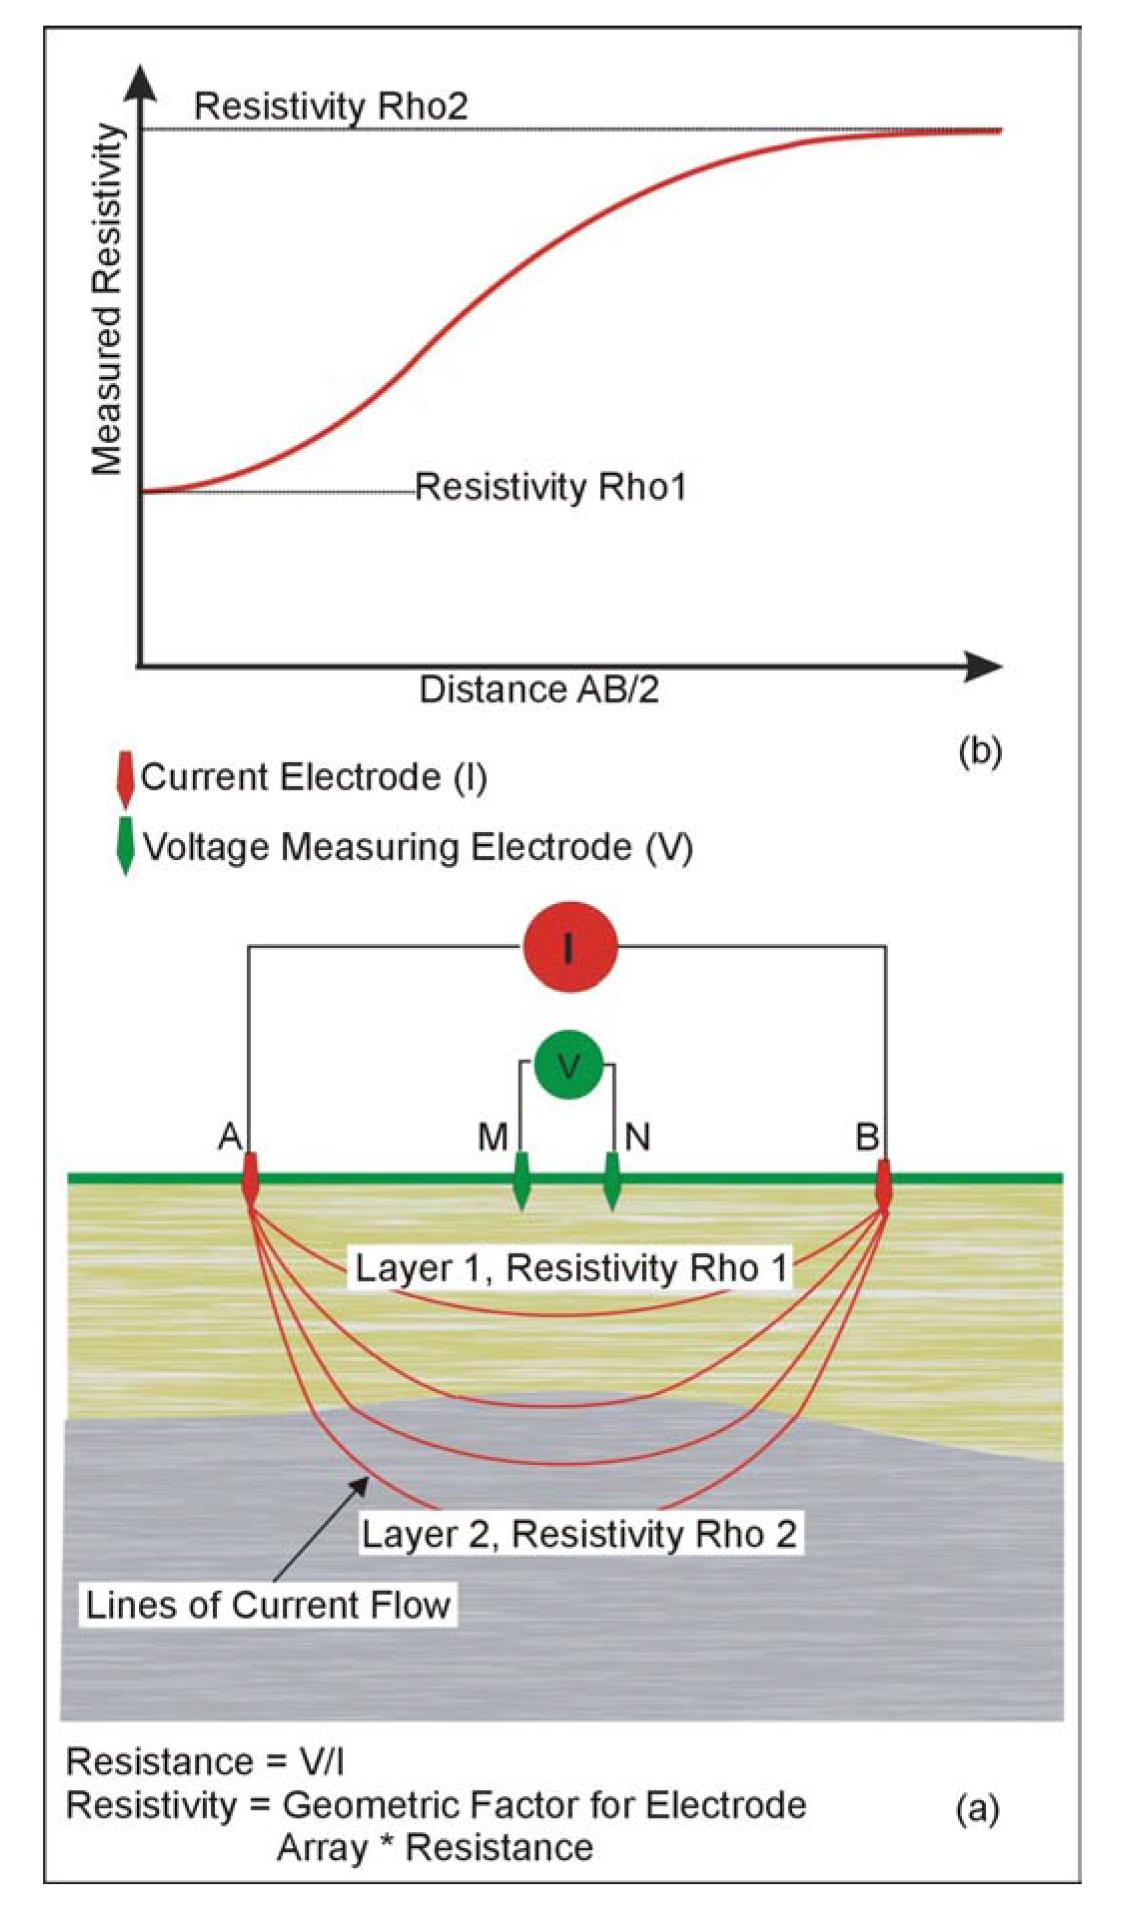 Electrode array for(a) measuring the 
		resistivity of the ground, and (b) a resistivity-sounding curve.